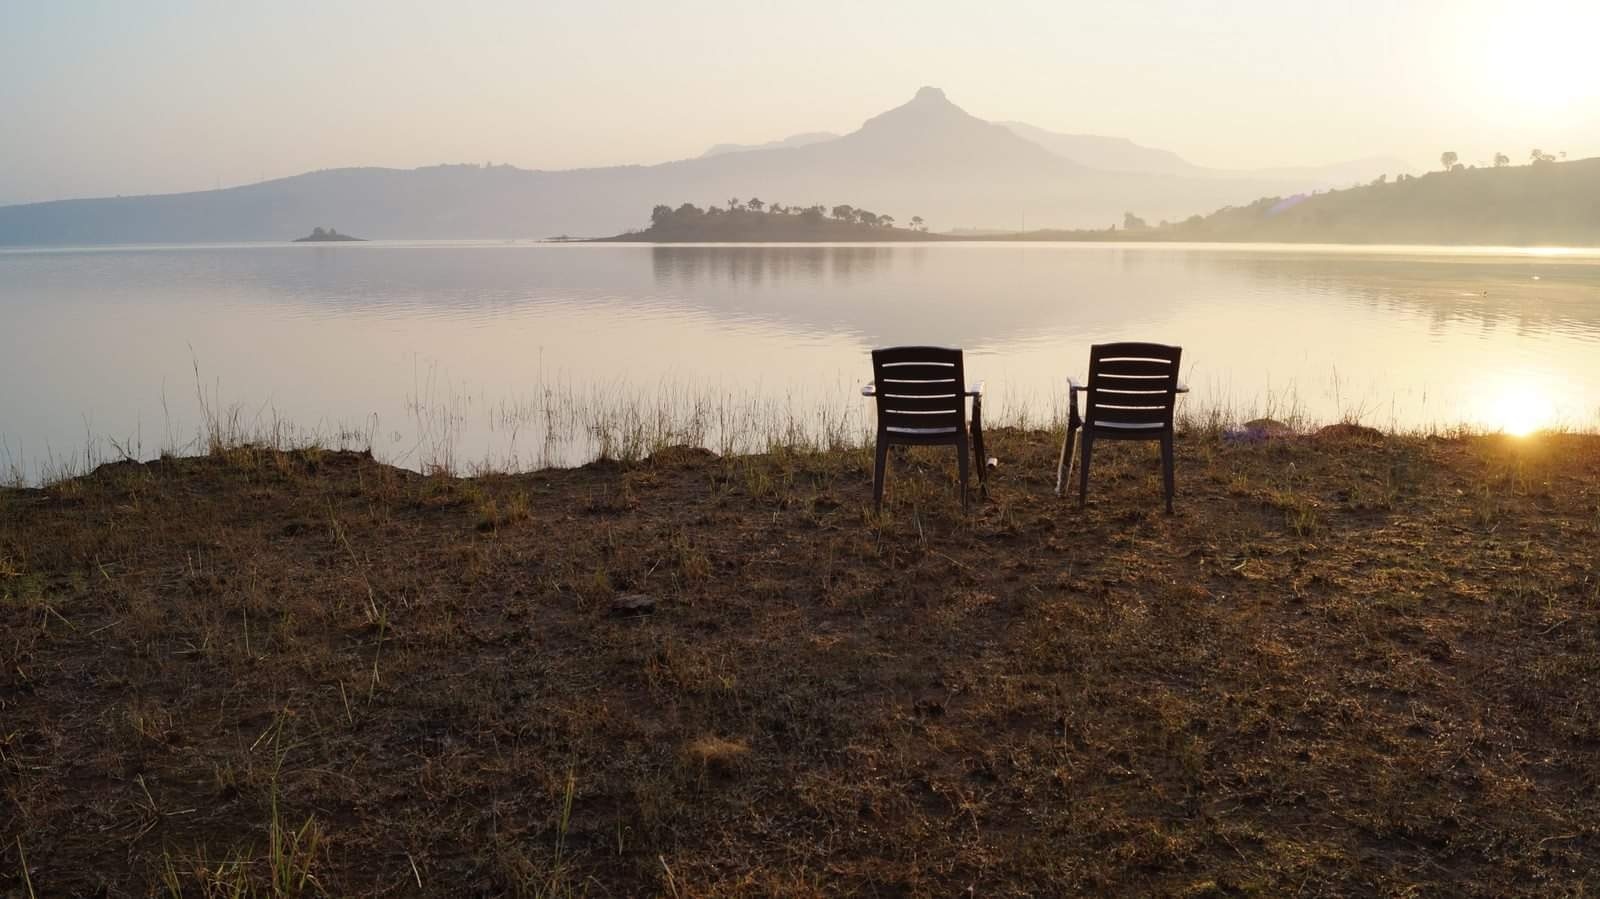 Shot during camping beside this beautiful lake located at lonavala, India. It was a blissful morning. 
#india #lonavala #serene #lake #morningbliss #camping